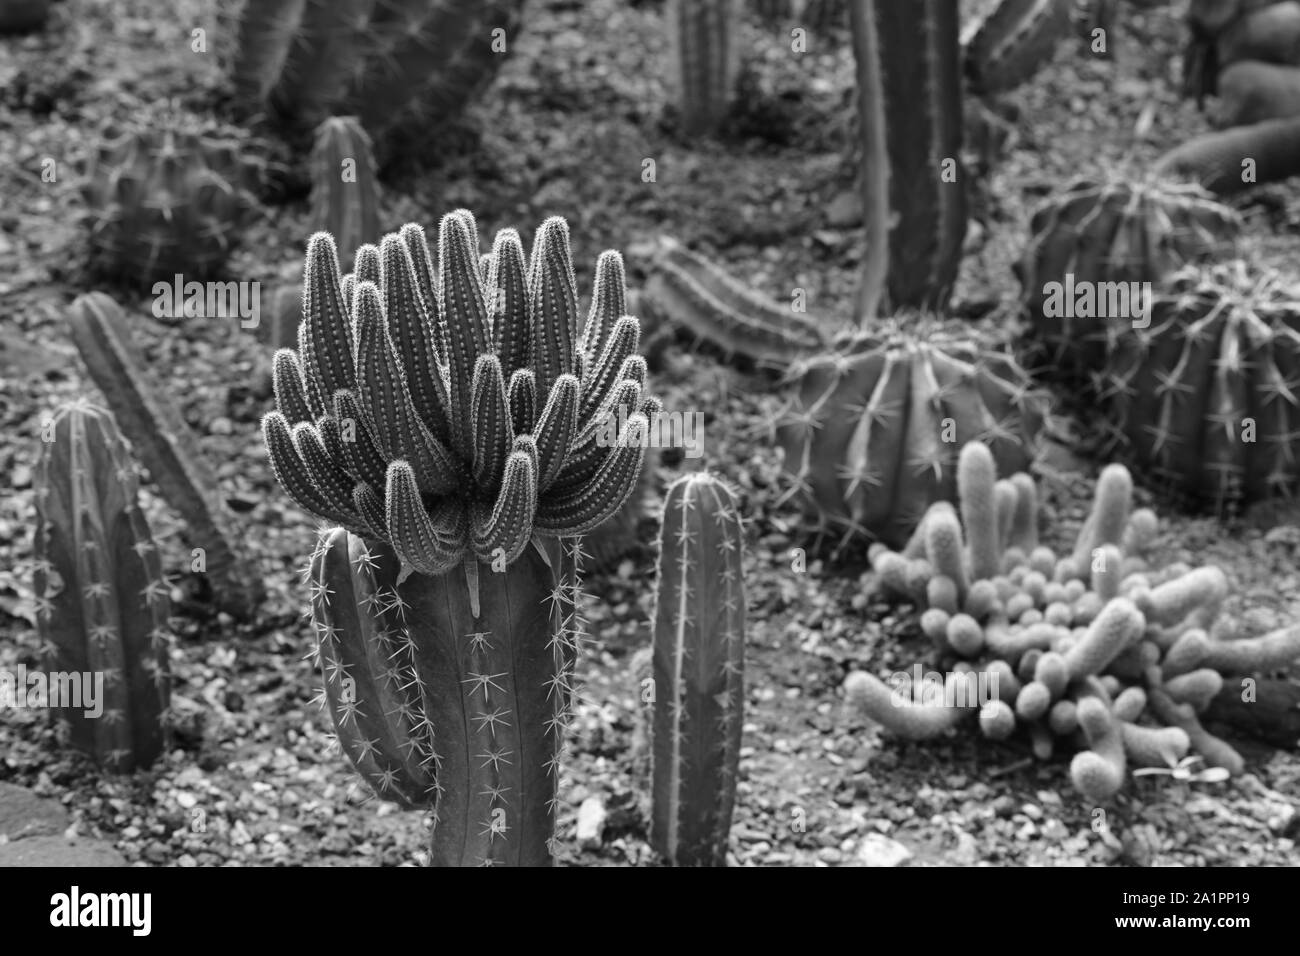 Different kinds of cactus plants in monochrome. Stock Photo